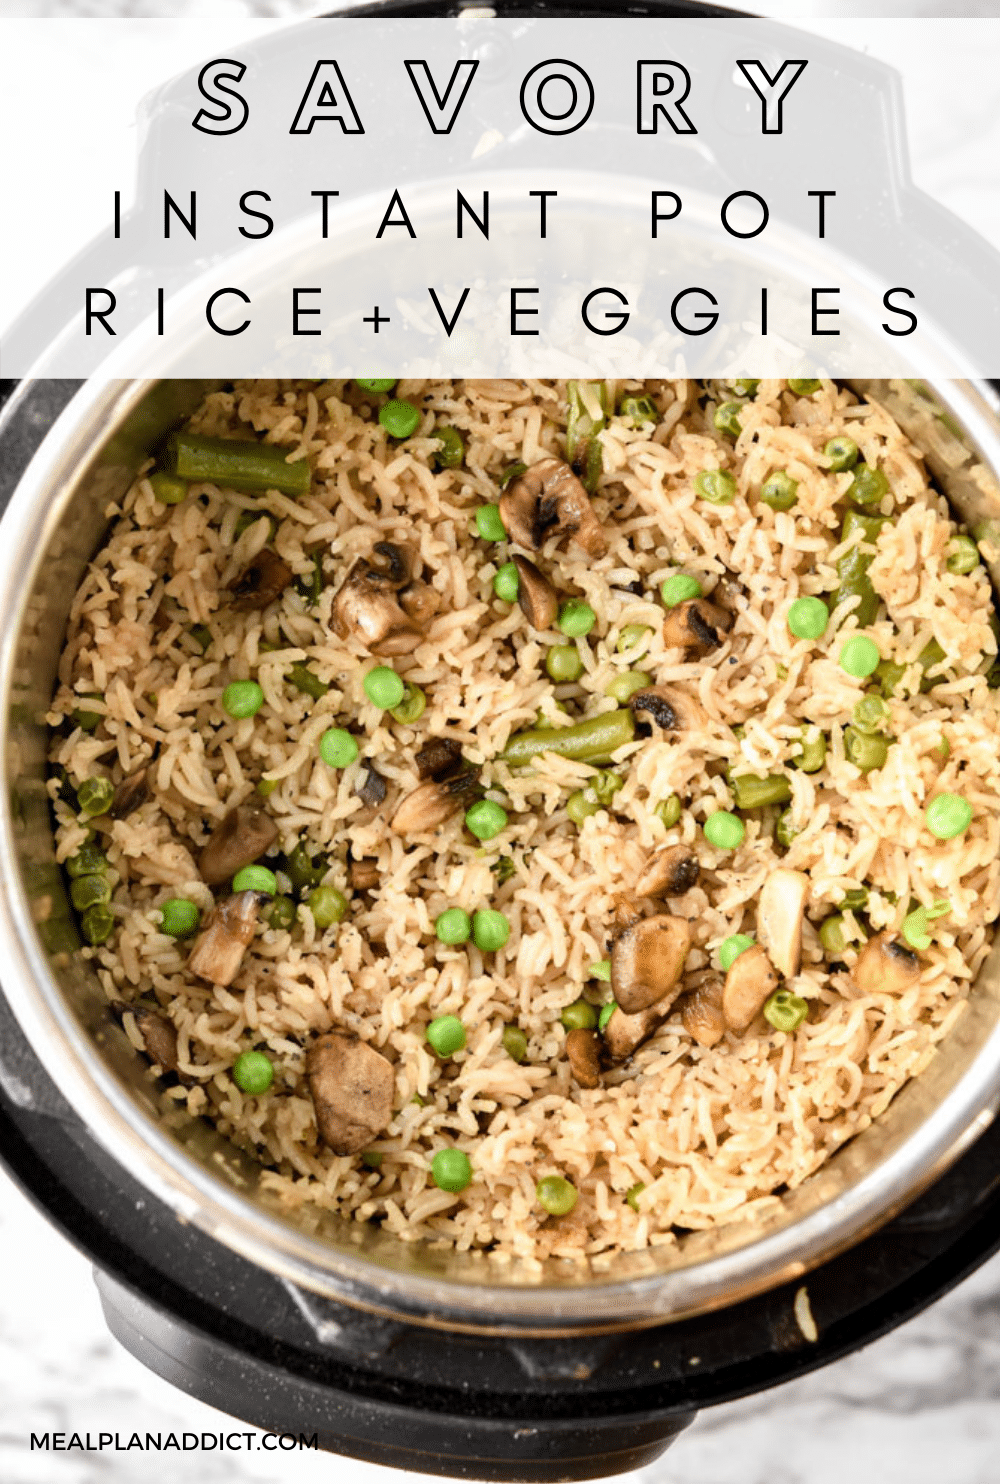 Rice and veggies pin for Pinterest